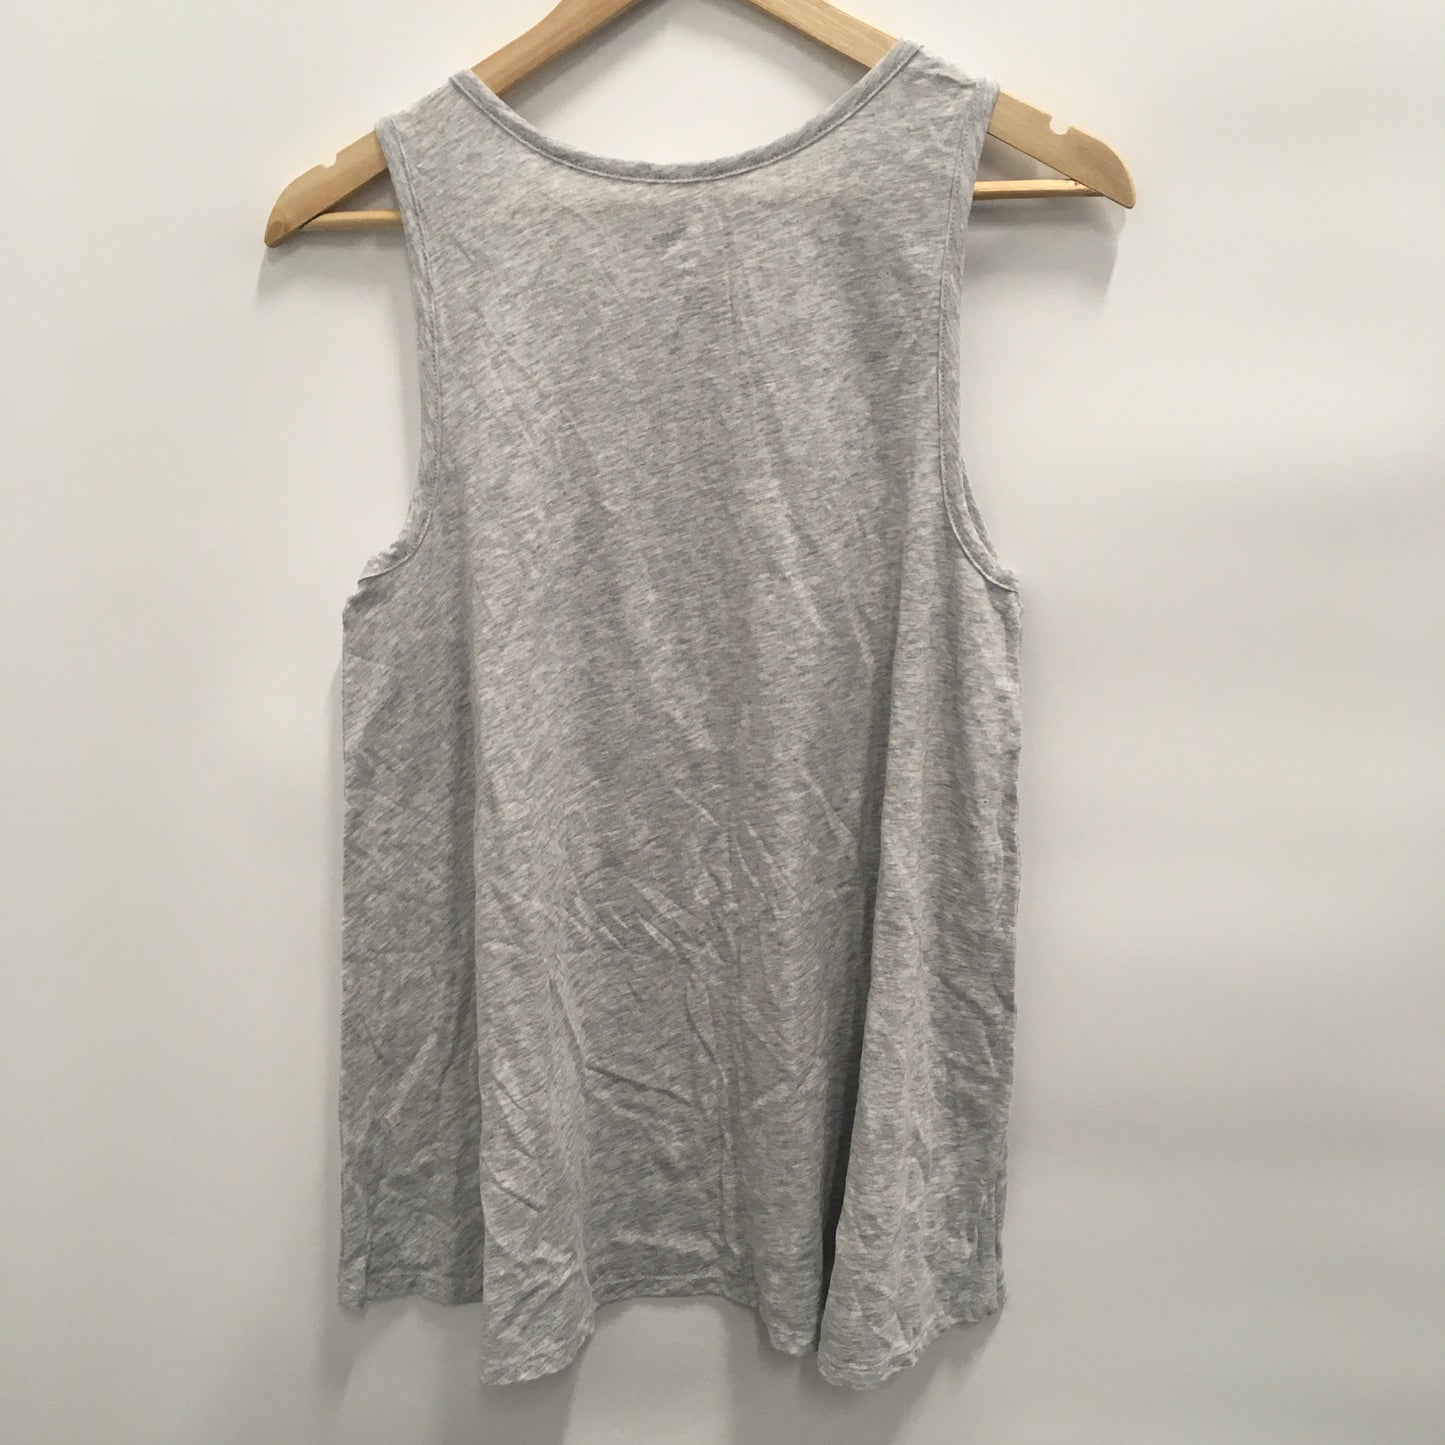 Athletic Tank Top By Sonoma  Size: M